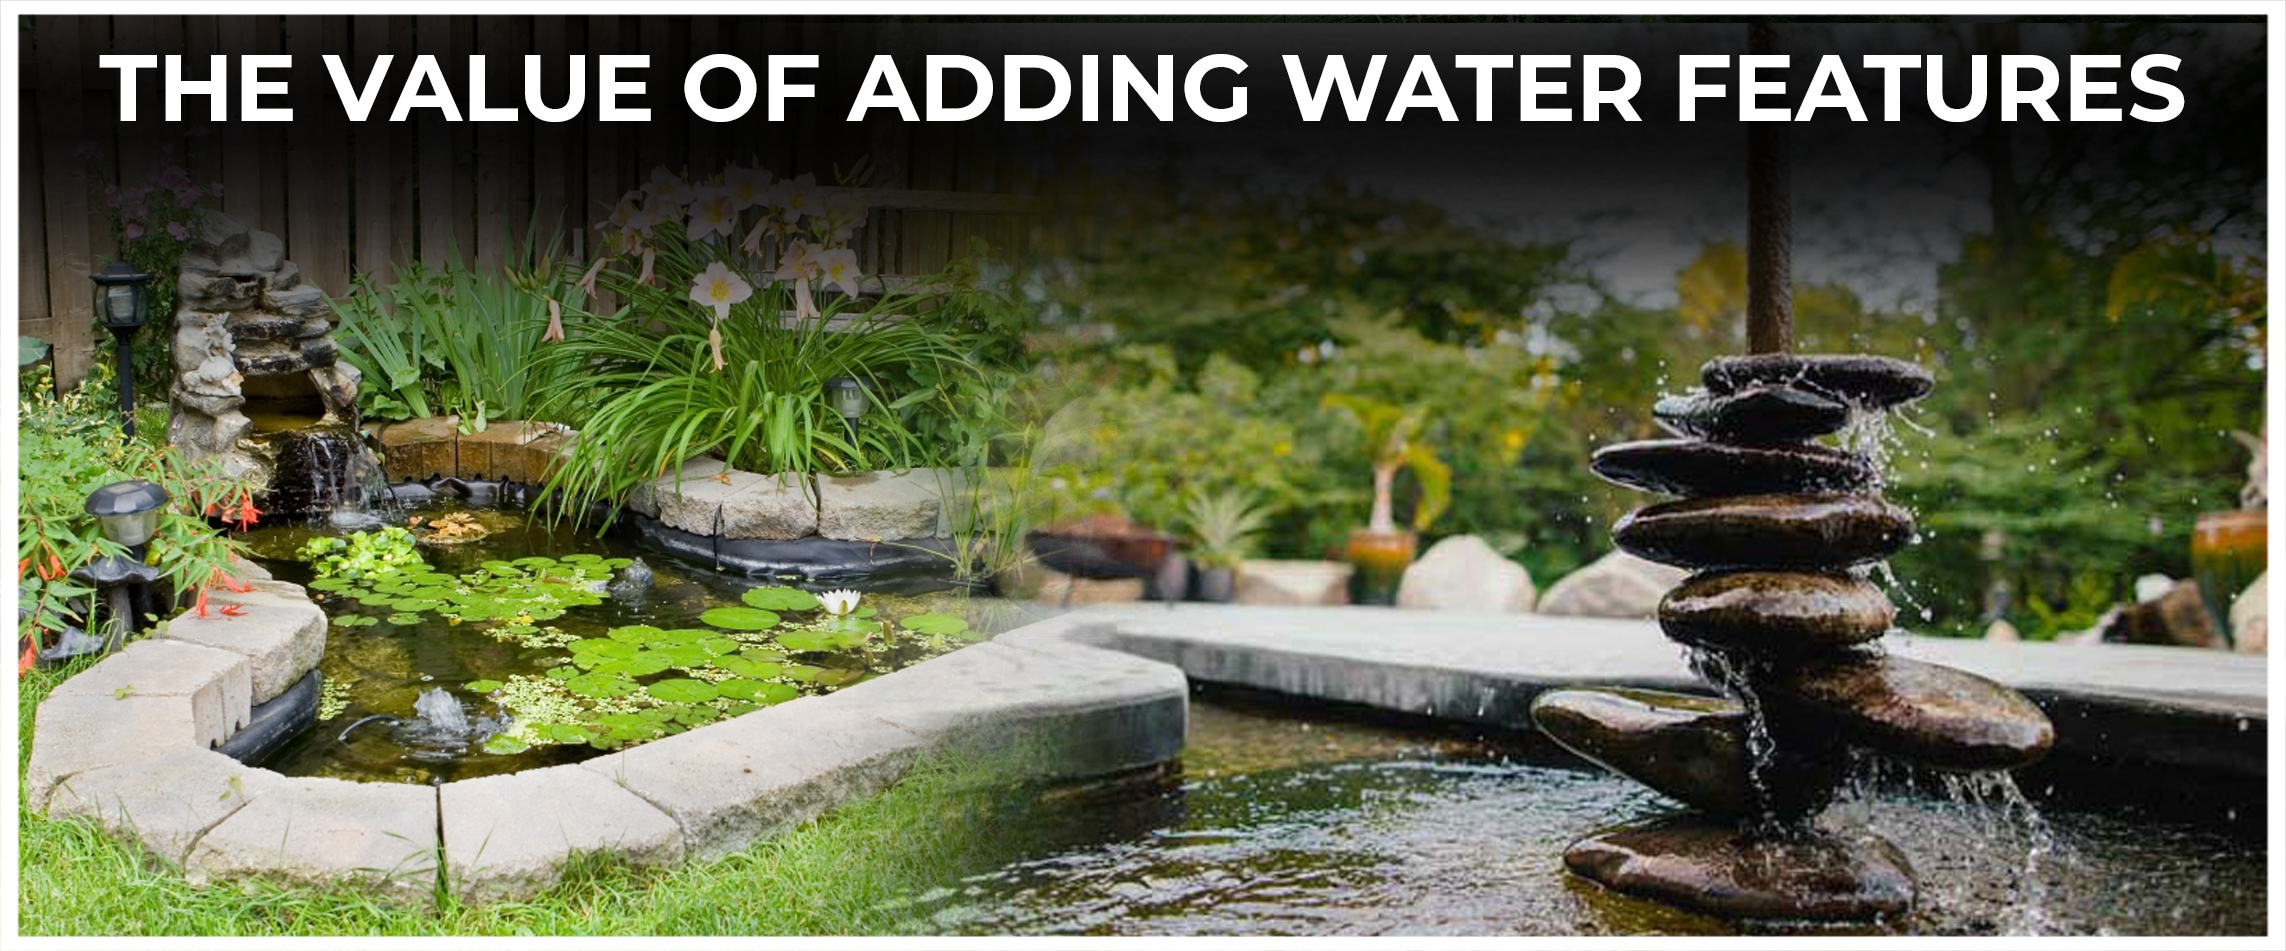  The Value of Adding Water Features